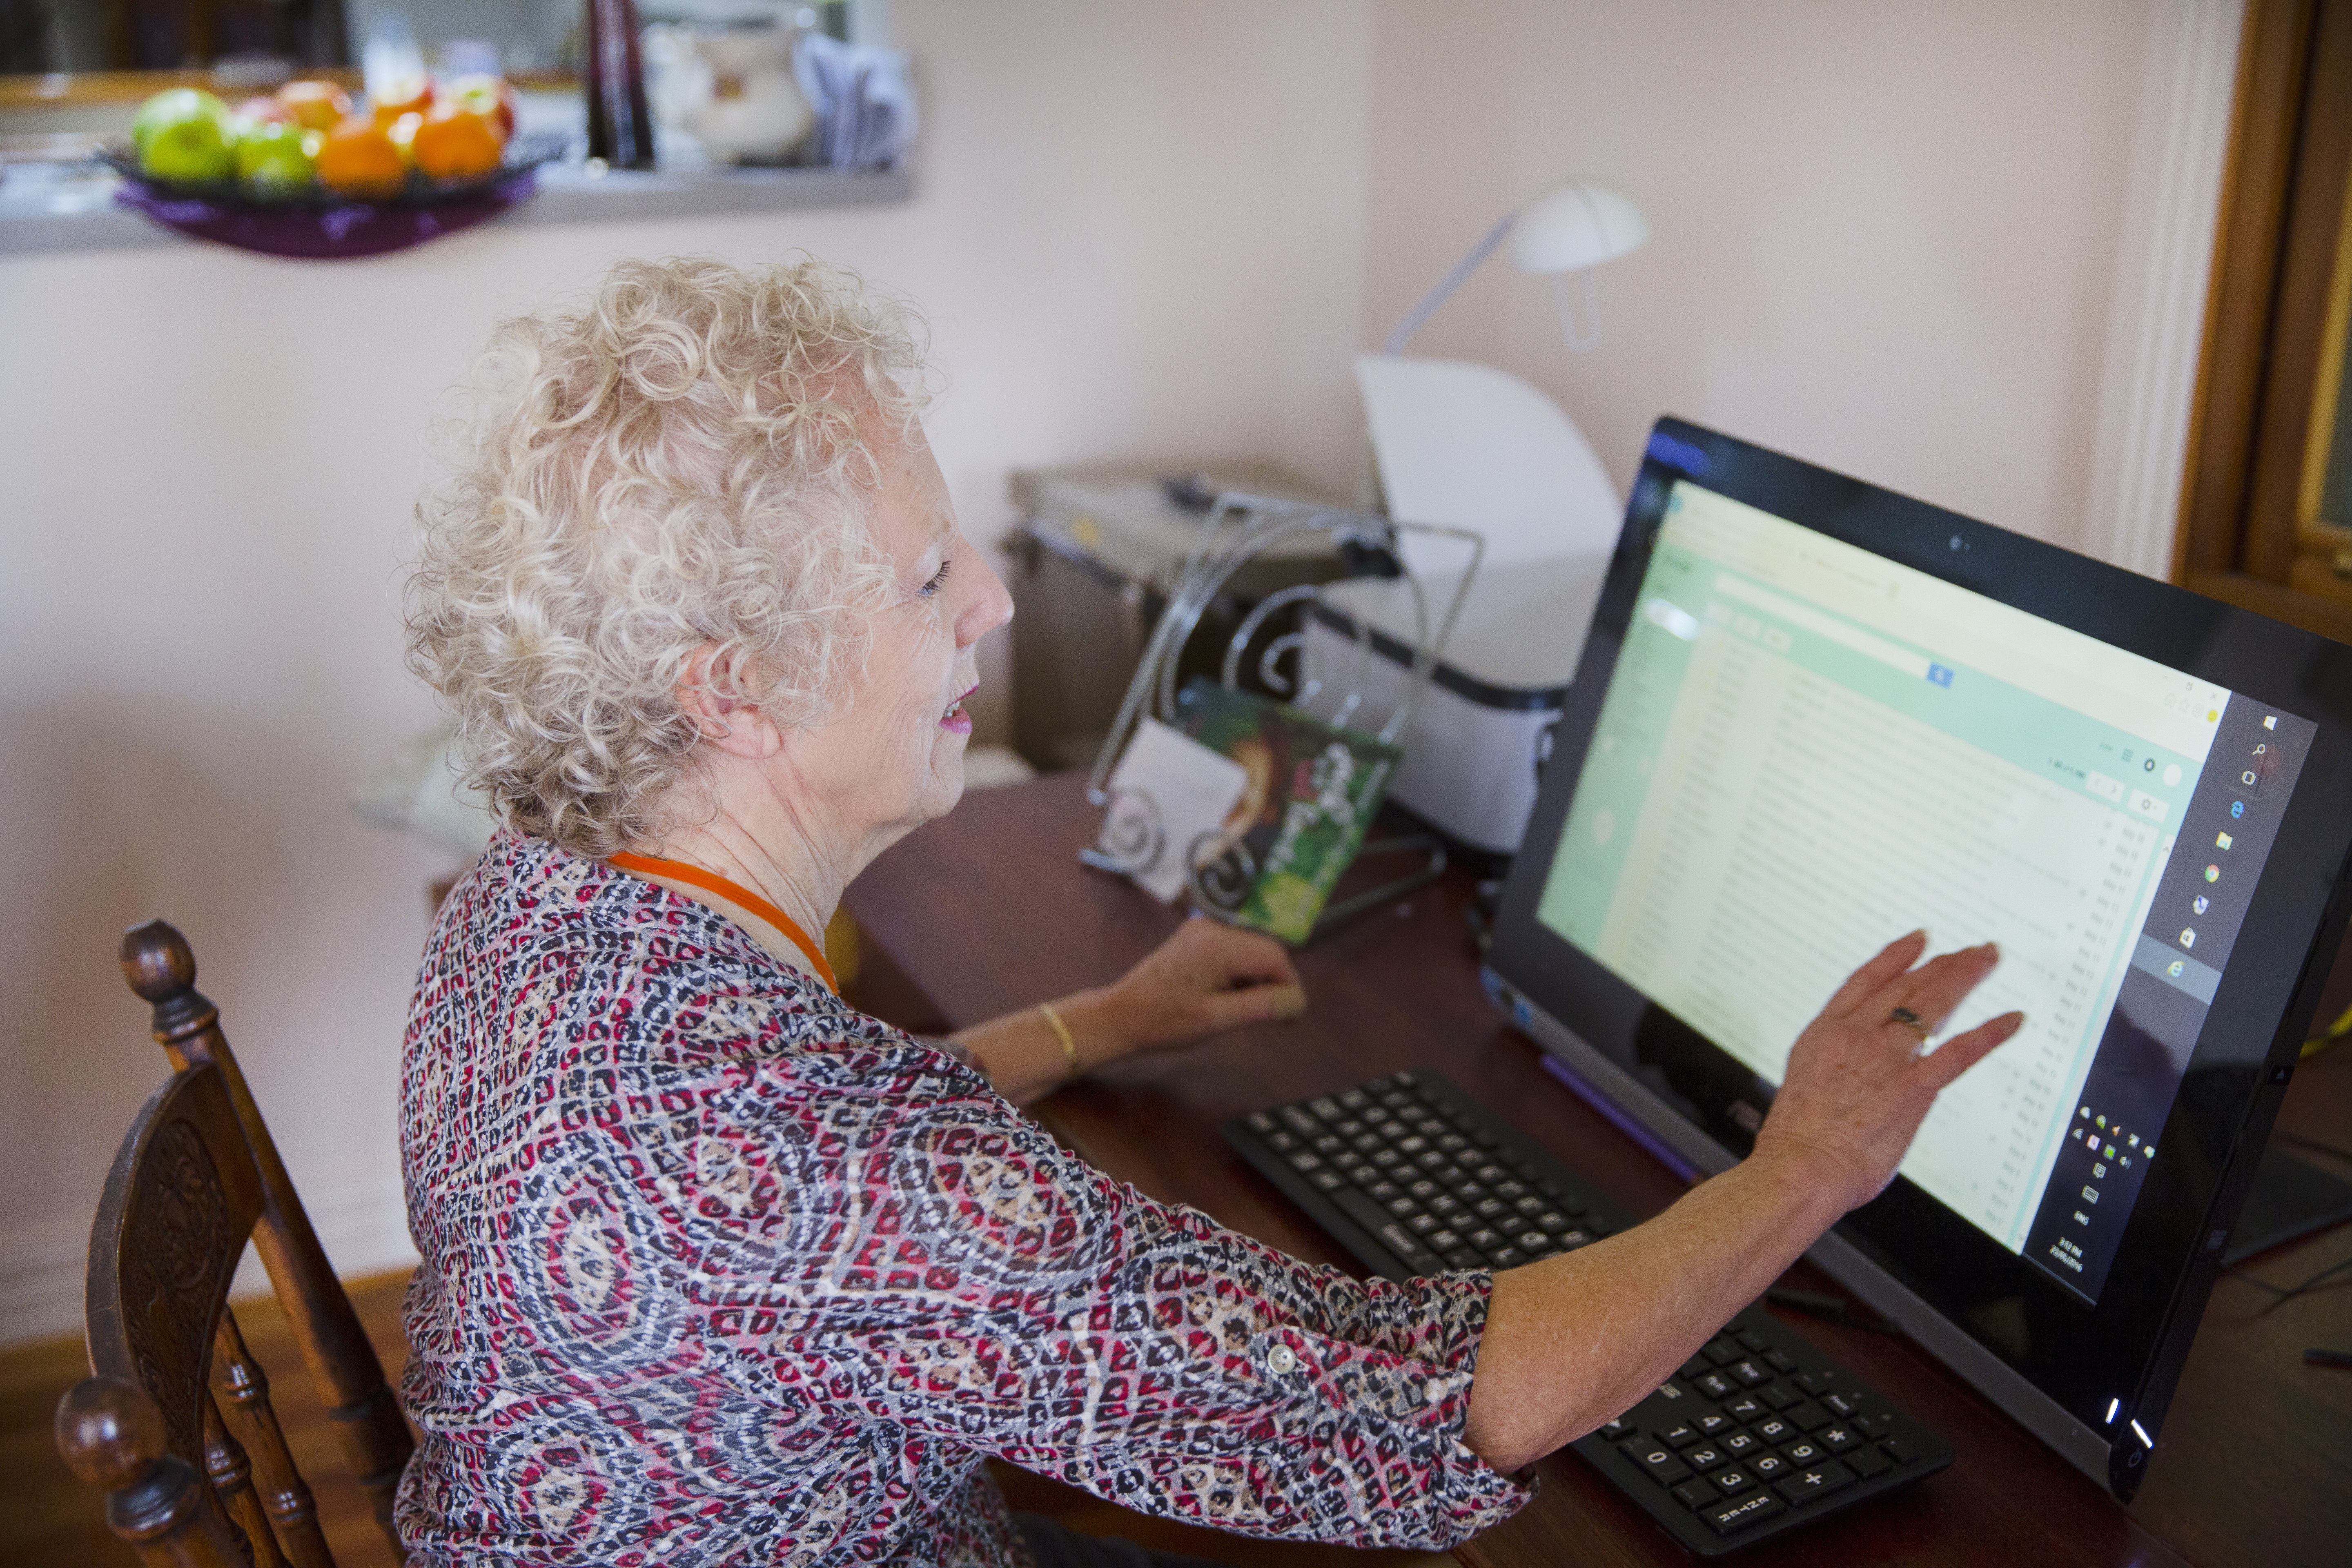 Woman using a computer with magnification software and large print keyboard, next to her is a printer 